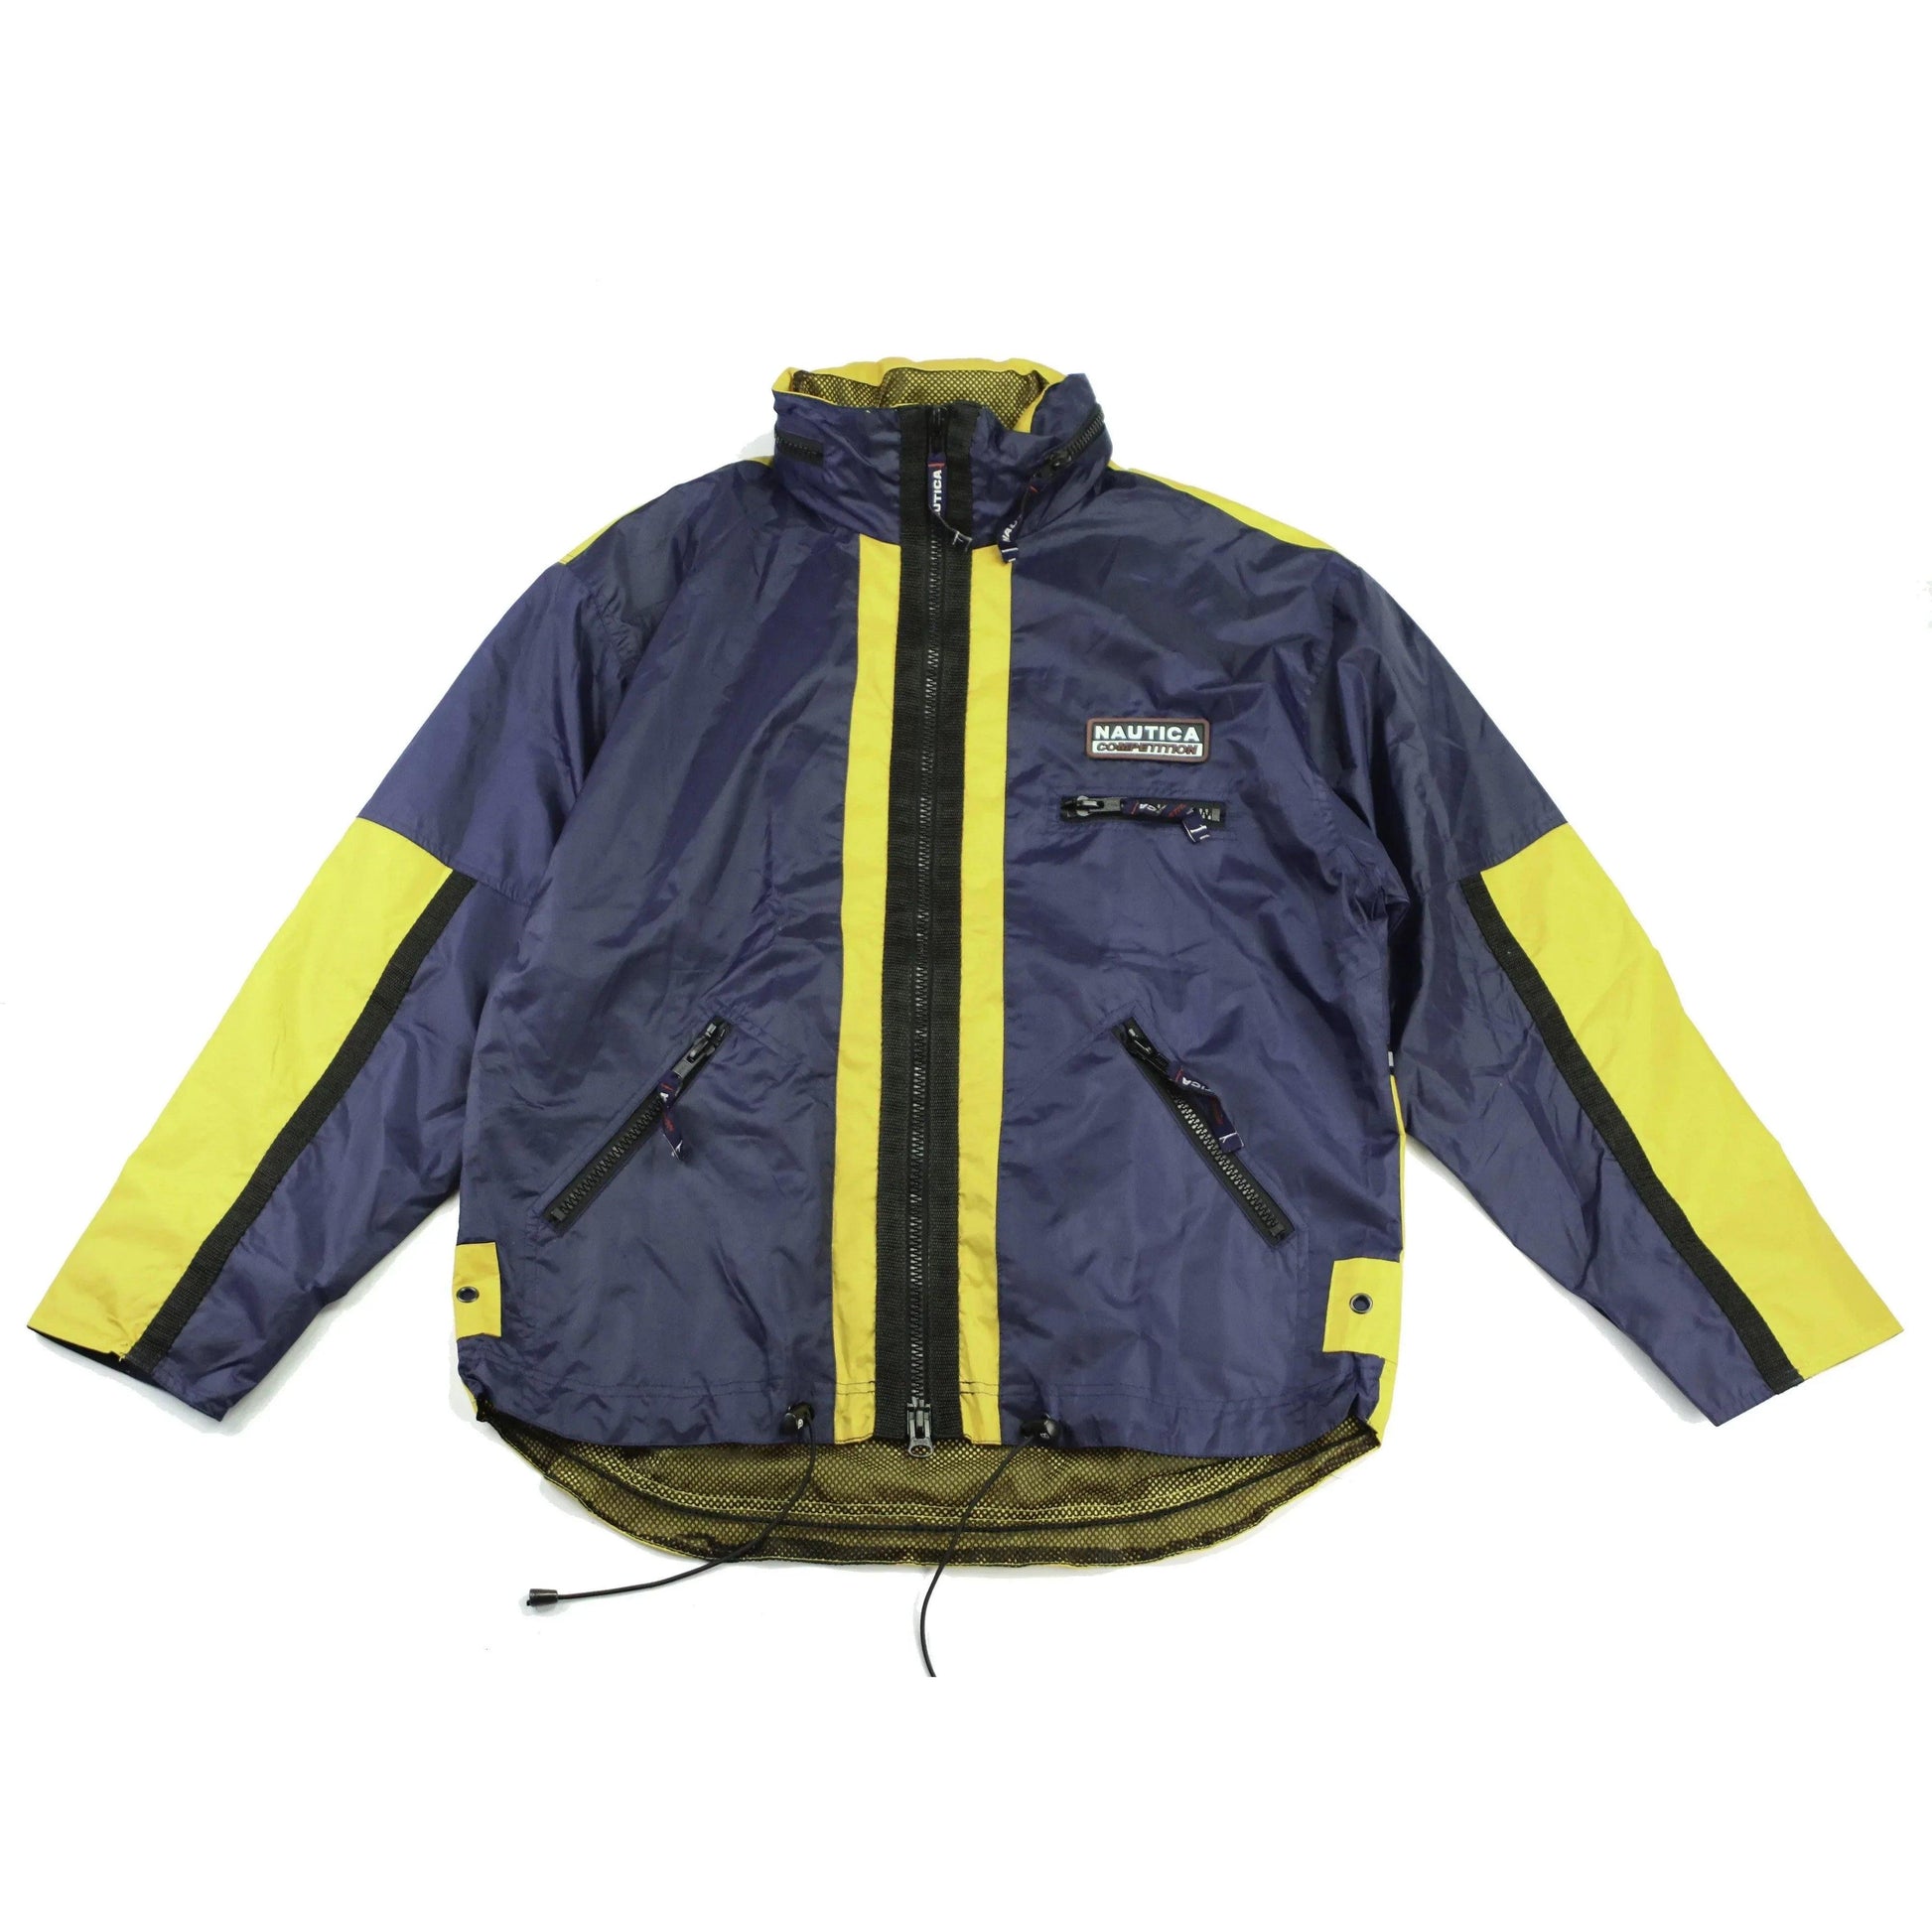 NAUTICA COMPETITON SPINNAKER JACKET (M) - Known Source